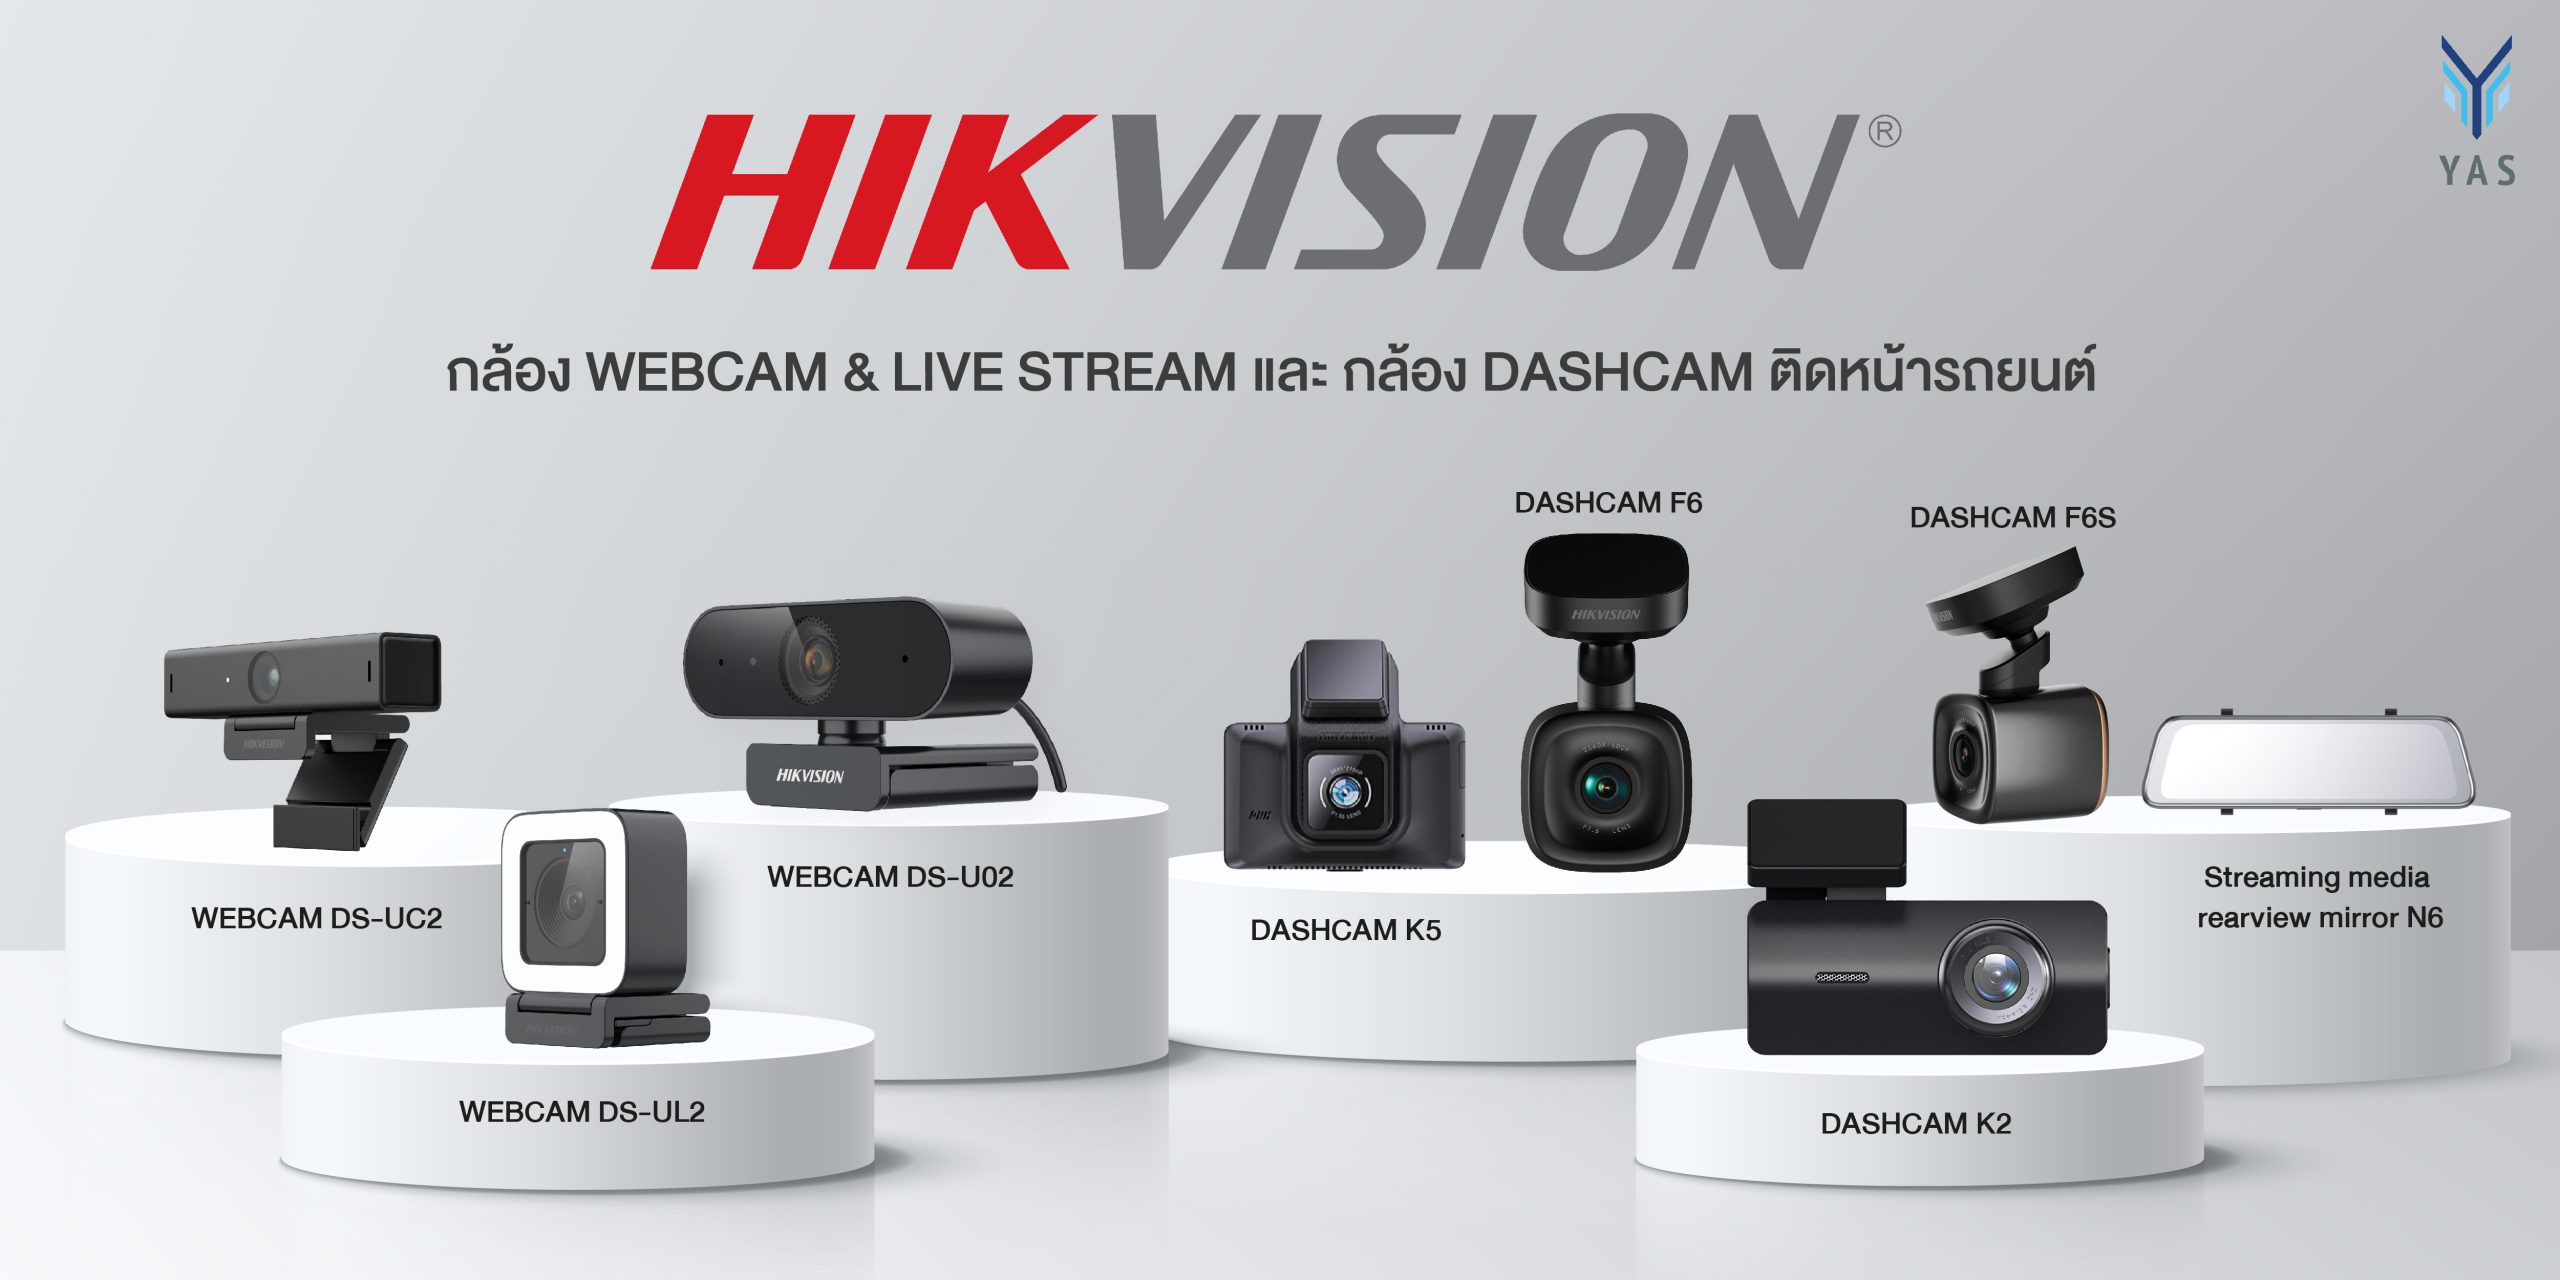 Hikvision by YAS